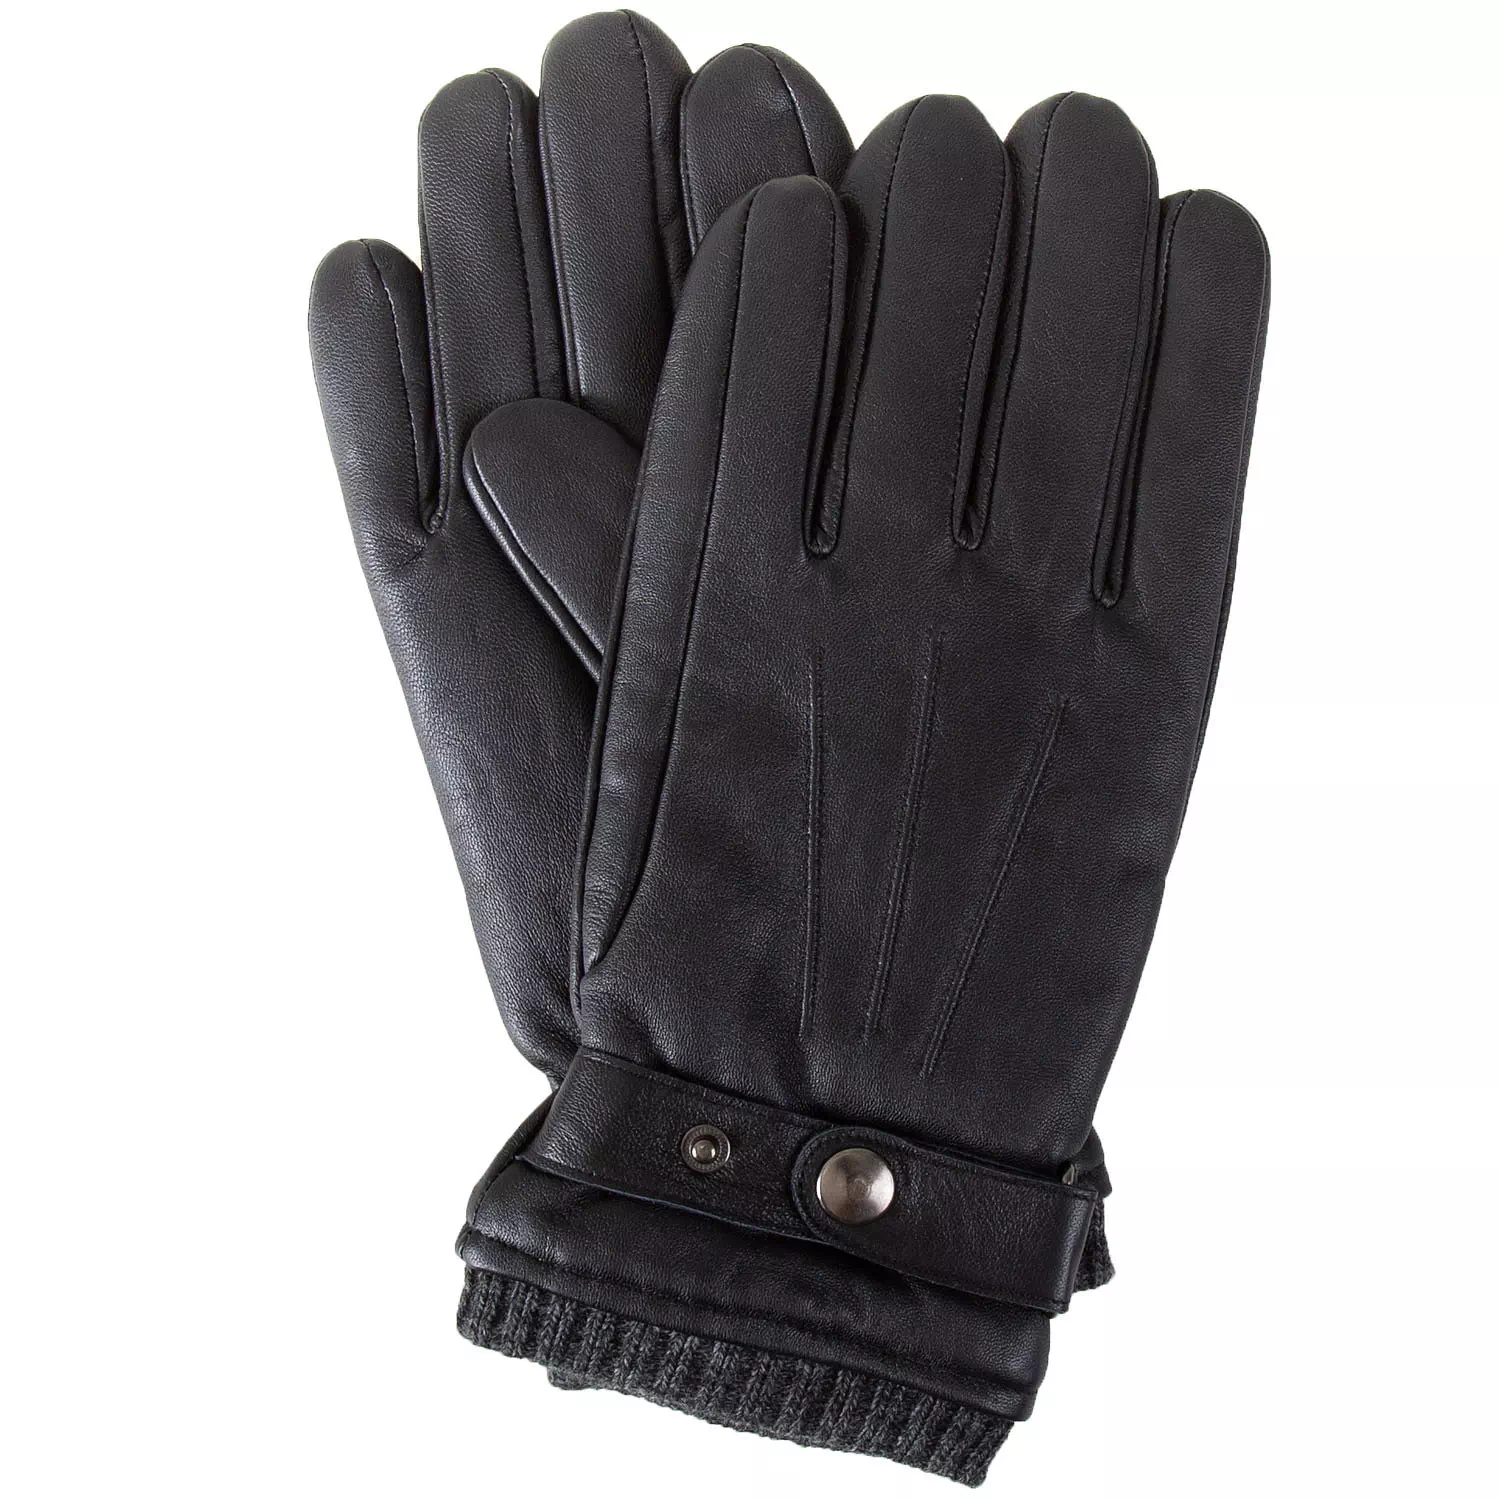 Leather gloves with rib knit cuff and adjustable wrist strap, extra large (XL)